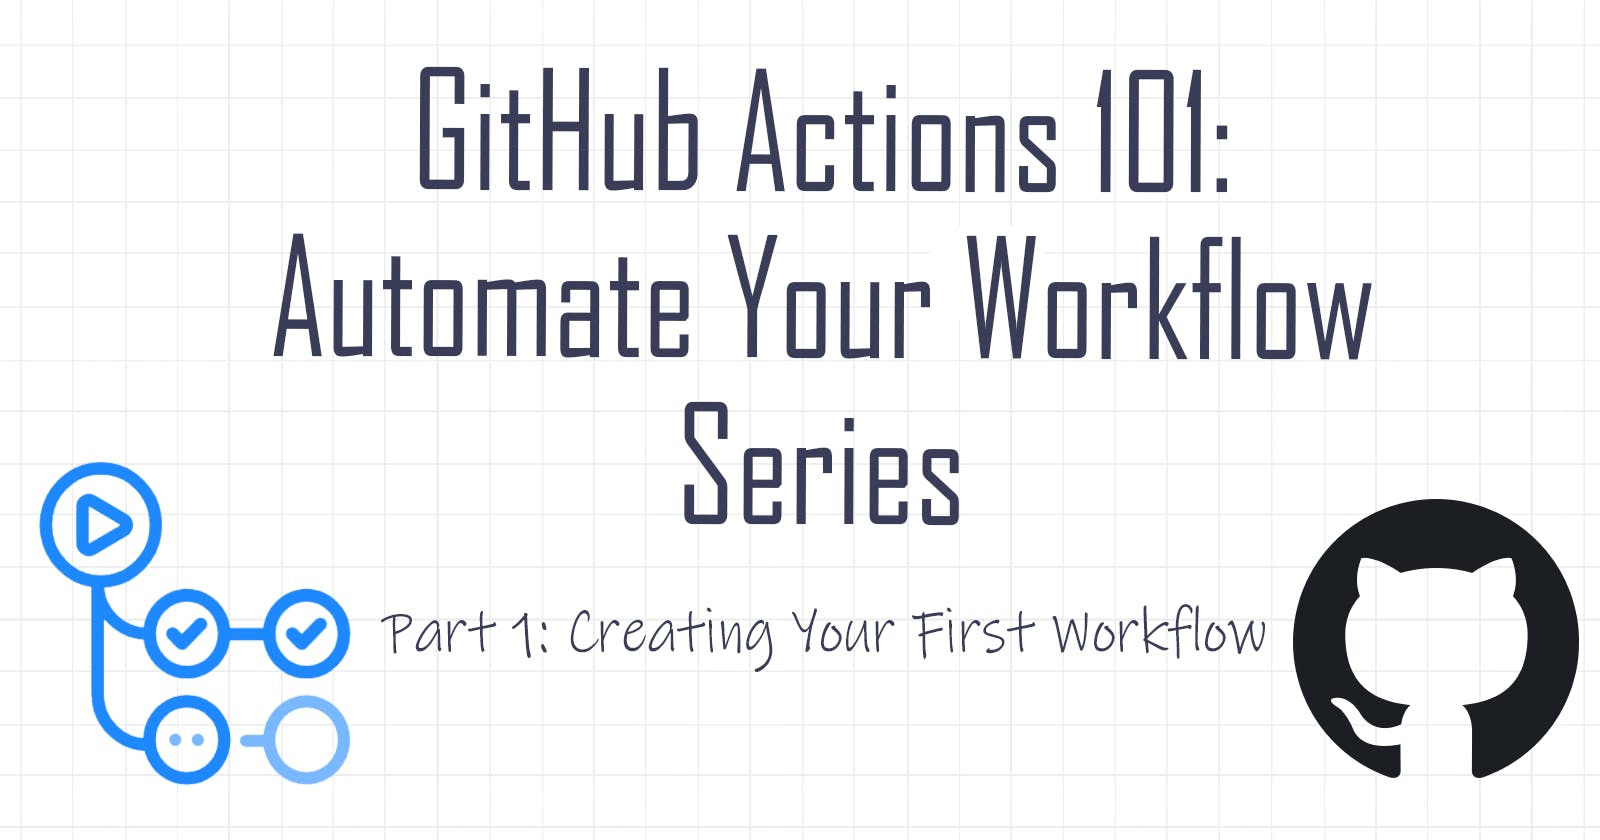 GitHub Actions 101: Creating Your First Workflow